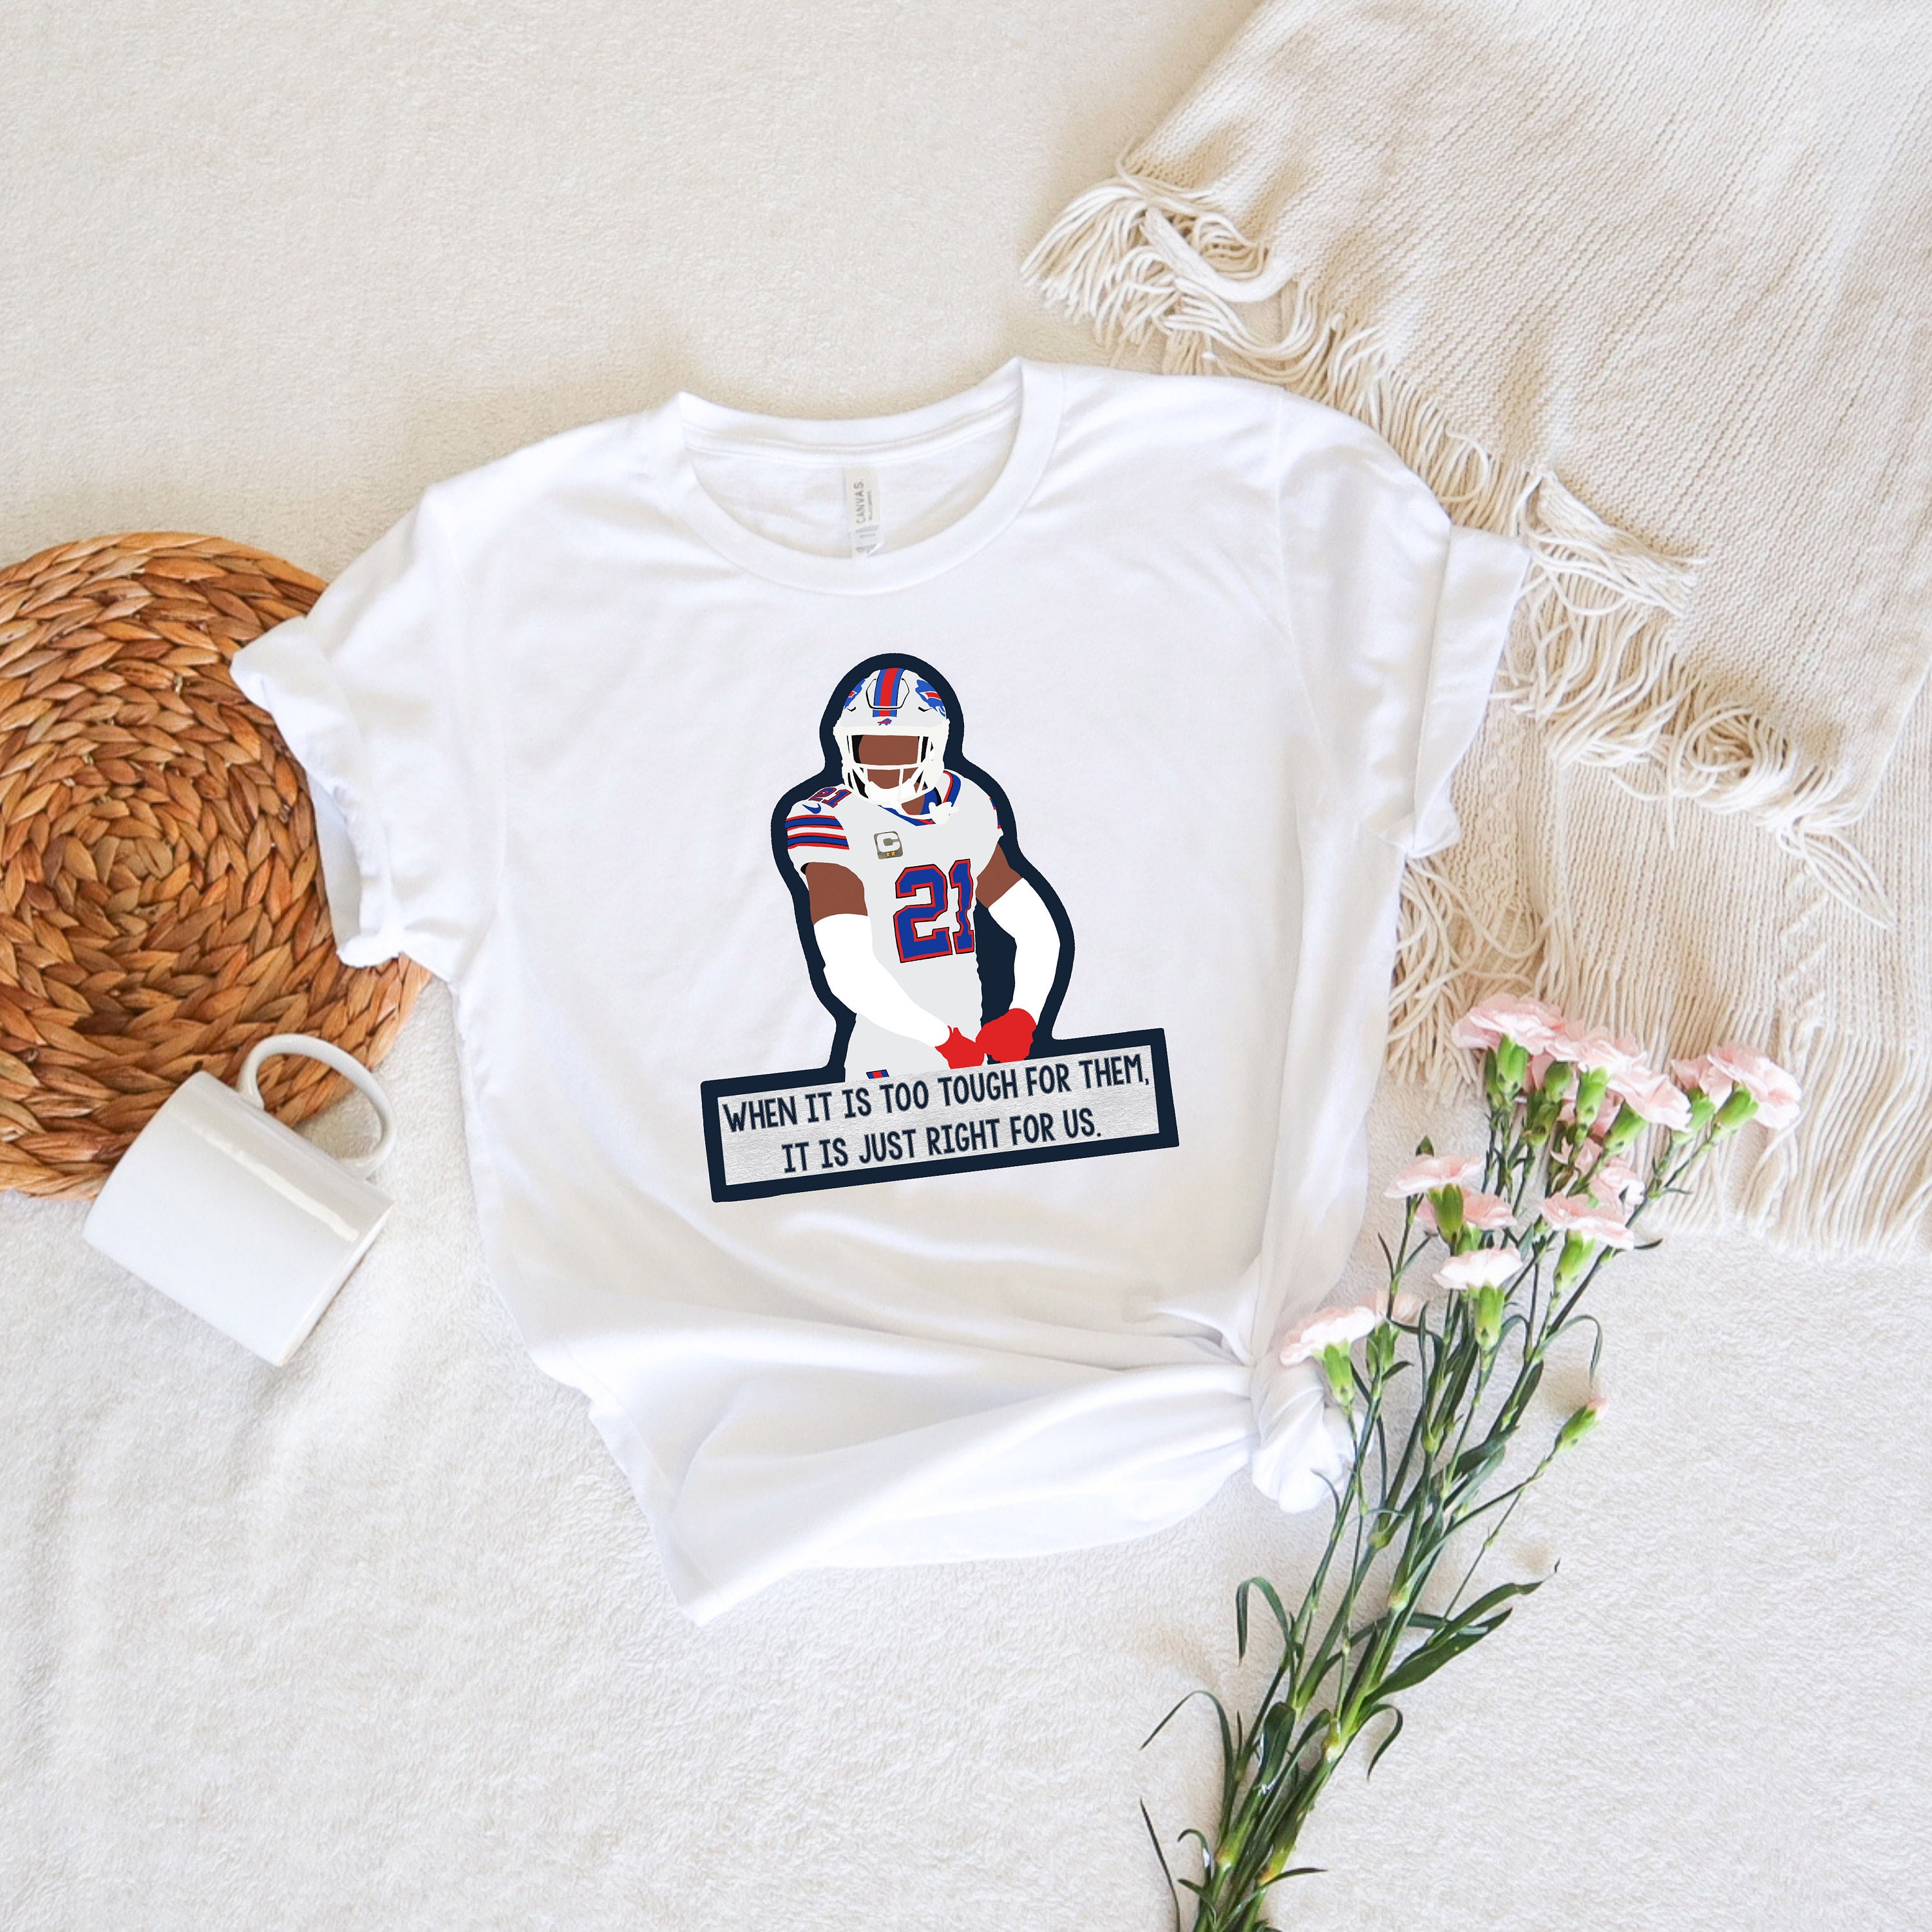 KellioStudio When It's Too Tough for Them, It's Just Right for US Bills Tshirt | Buffalo Tee | Buffalo Bills Shirt | Jordan Poyer Shirt | Buffalo Gift